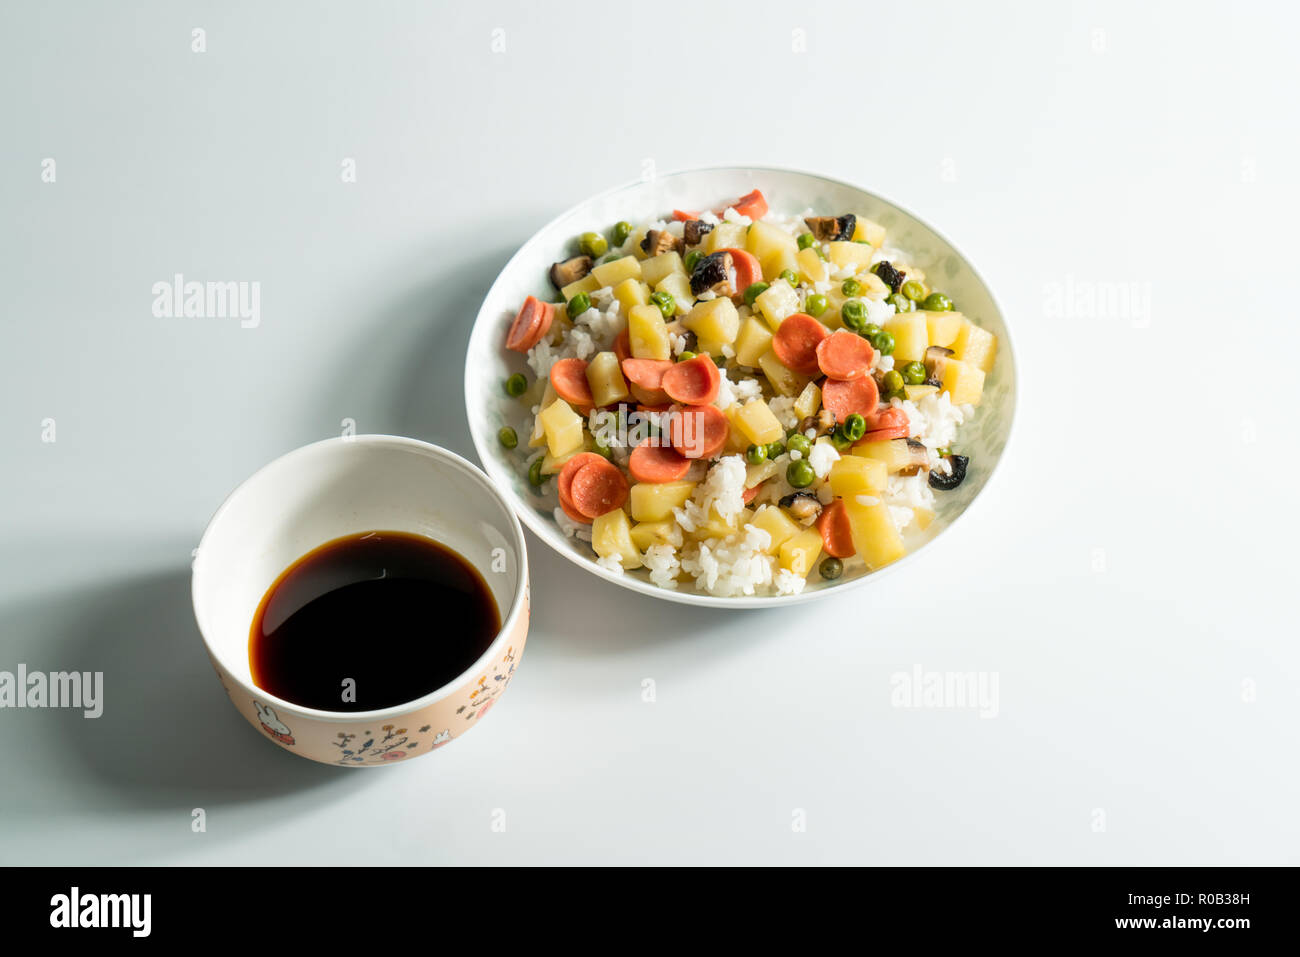 Fried rice and wooden background Stock Photo